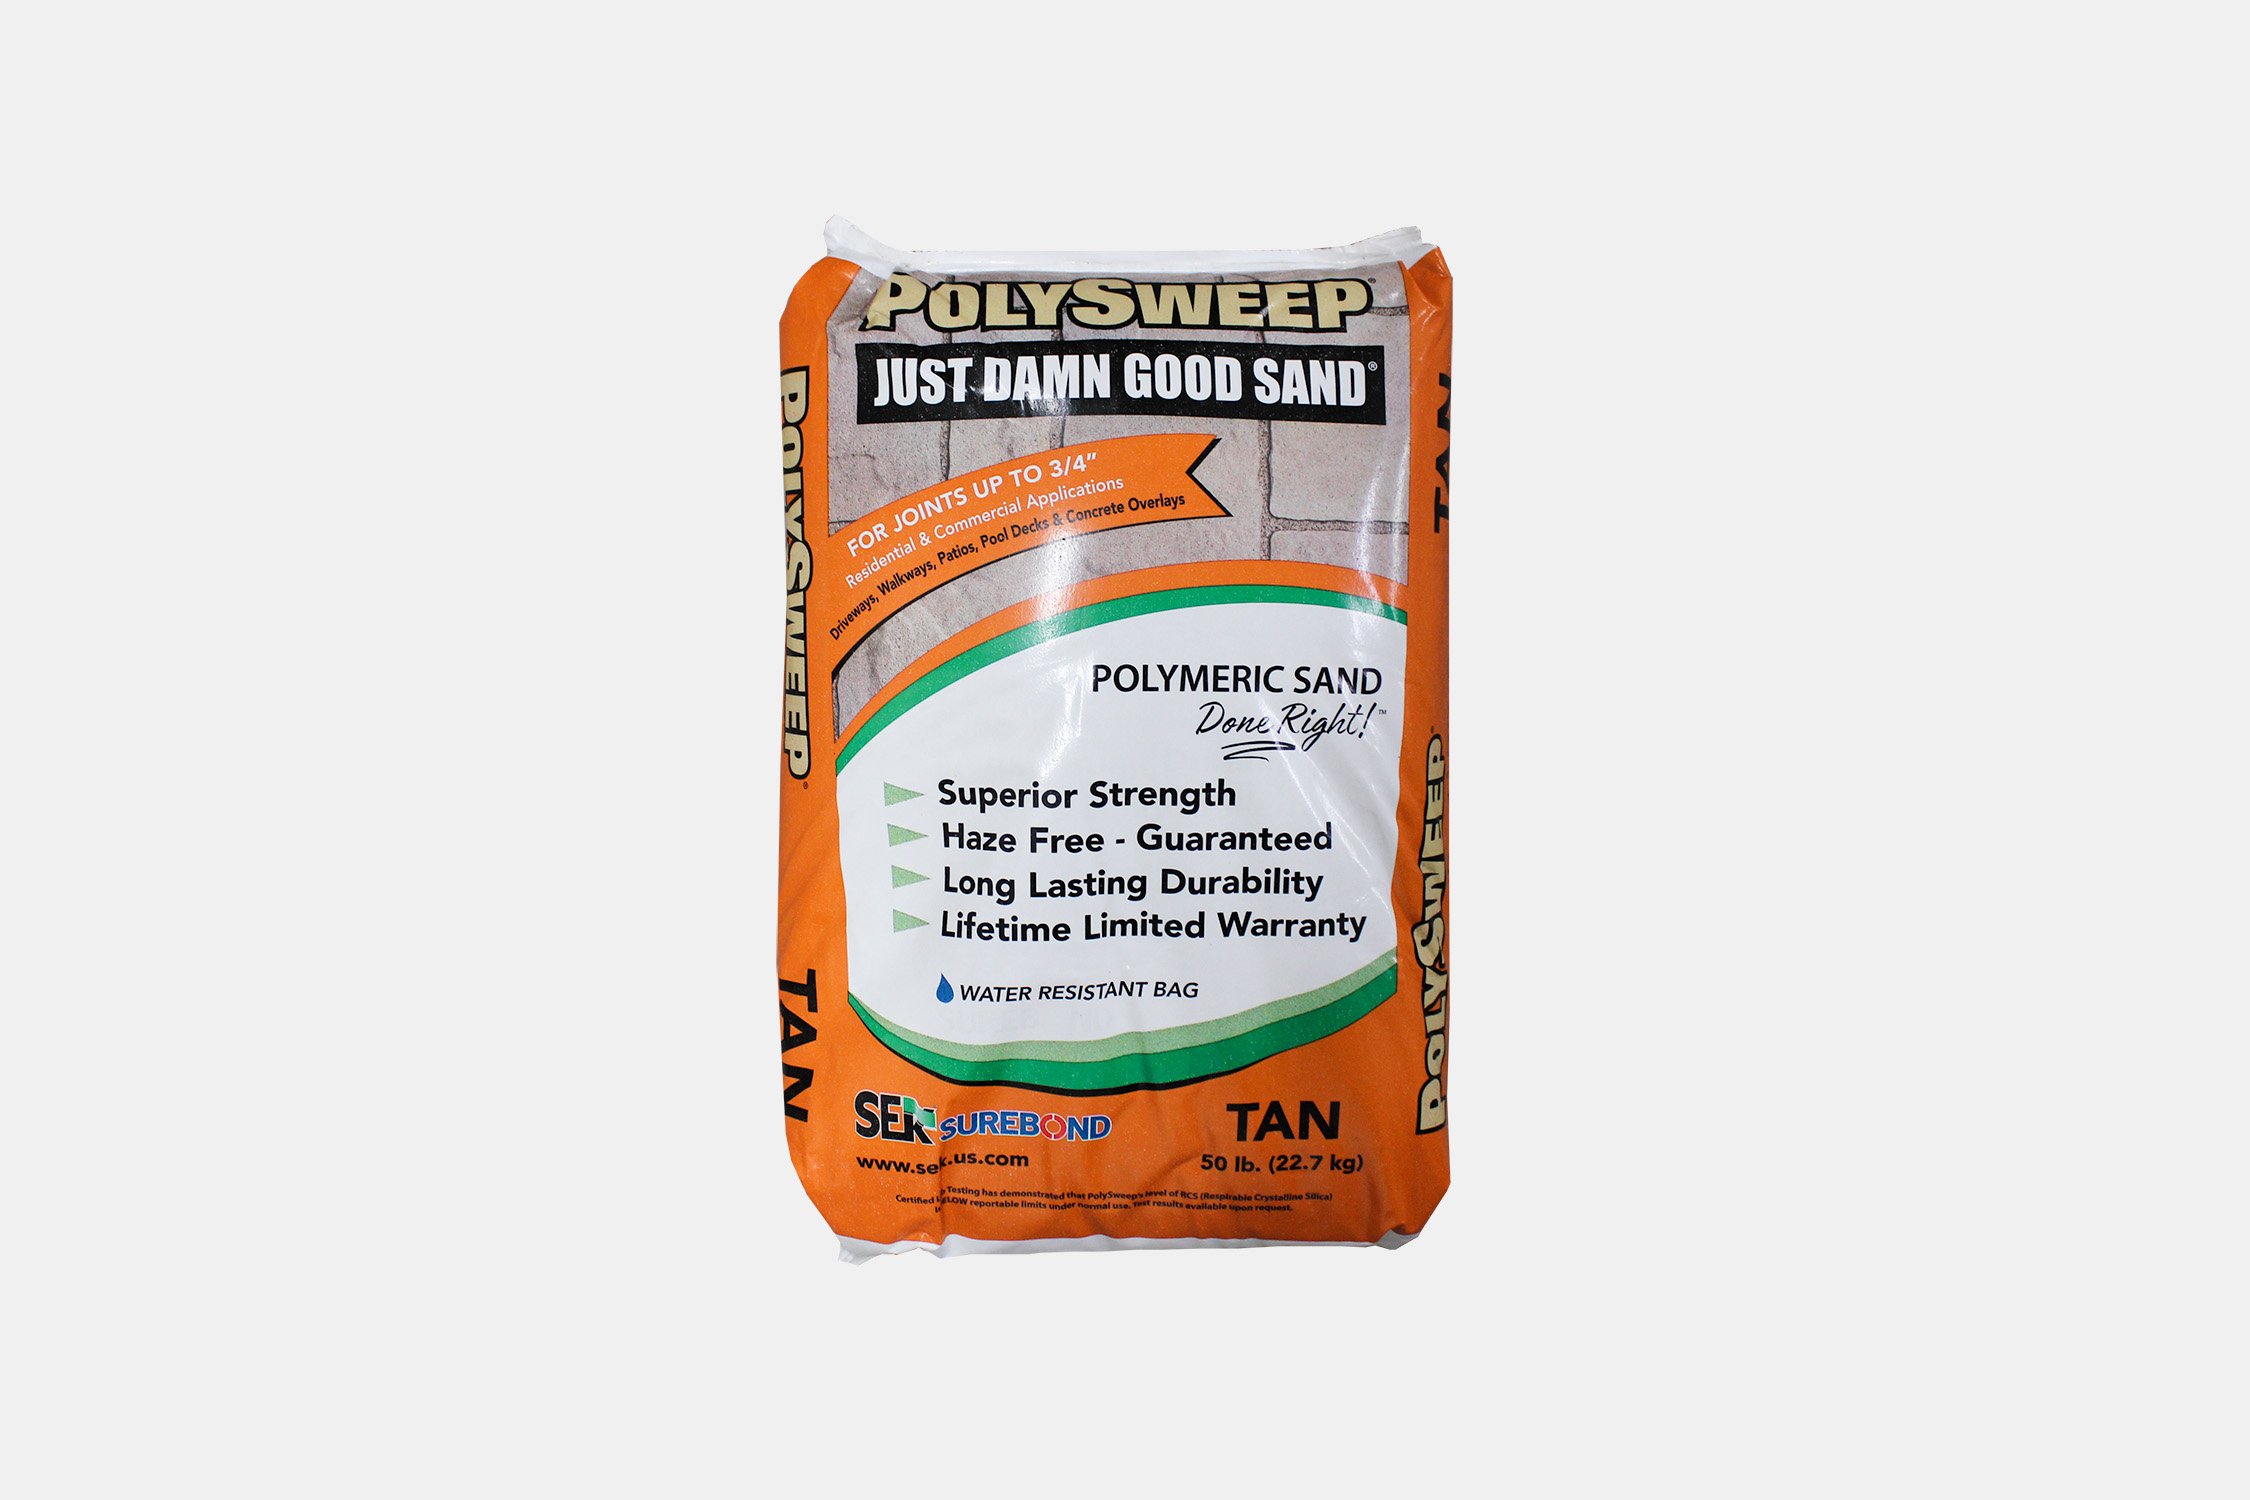 Tint Seal Pigmented Sealer for Brick Pavers — Acrylux Paint